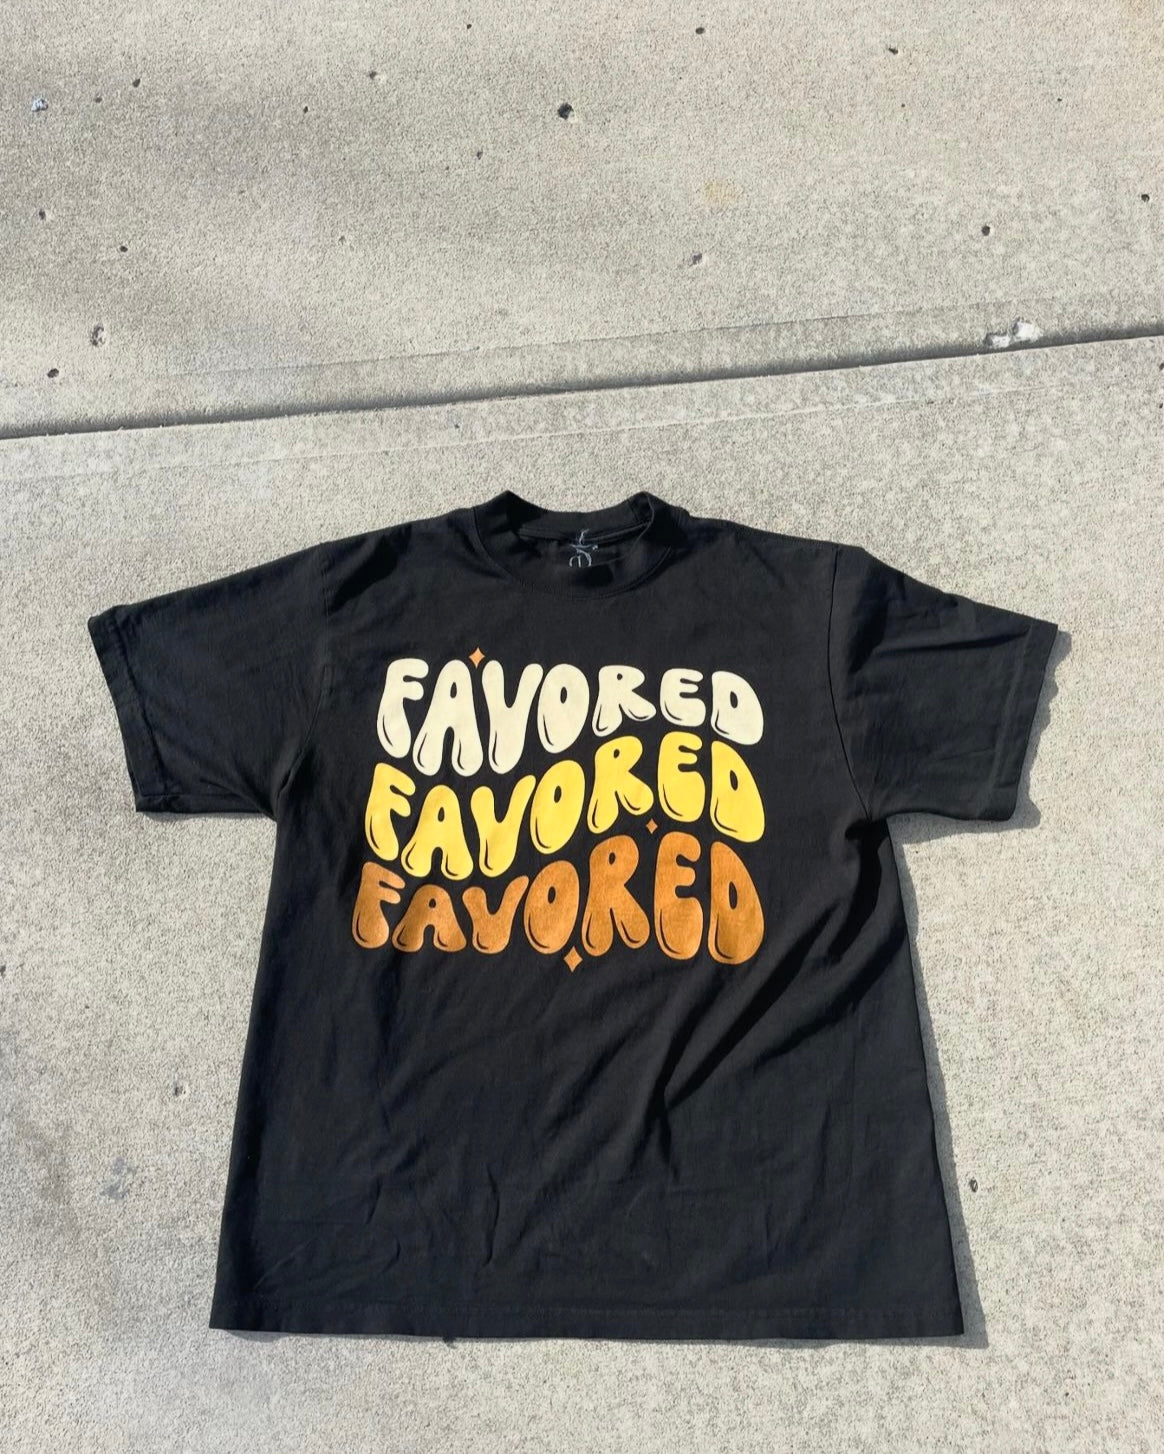 “Favored” tee